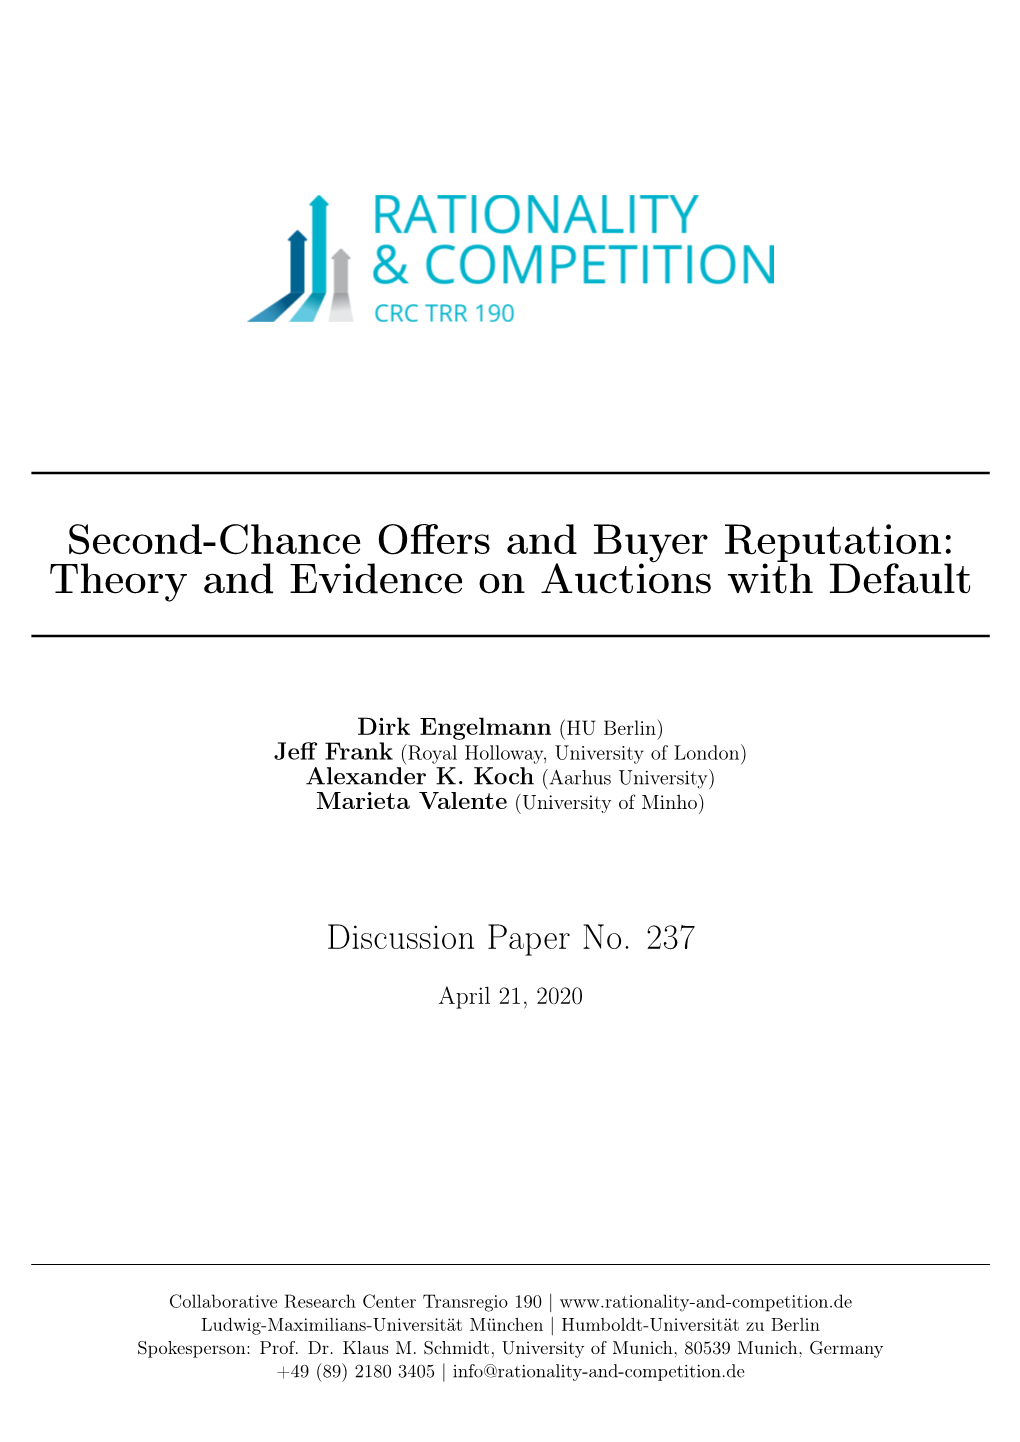 Second-Chance Offers and Buyer Reputation: Theory and Evidence on Auctions with Default